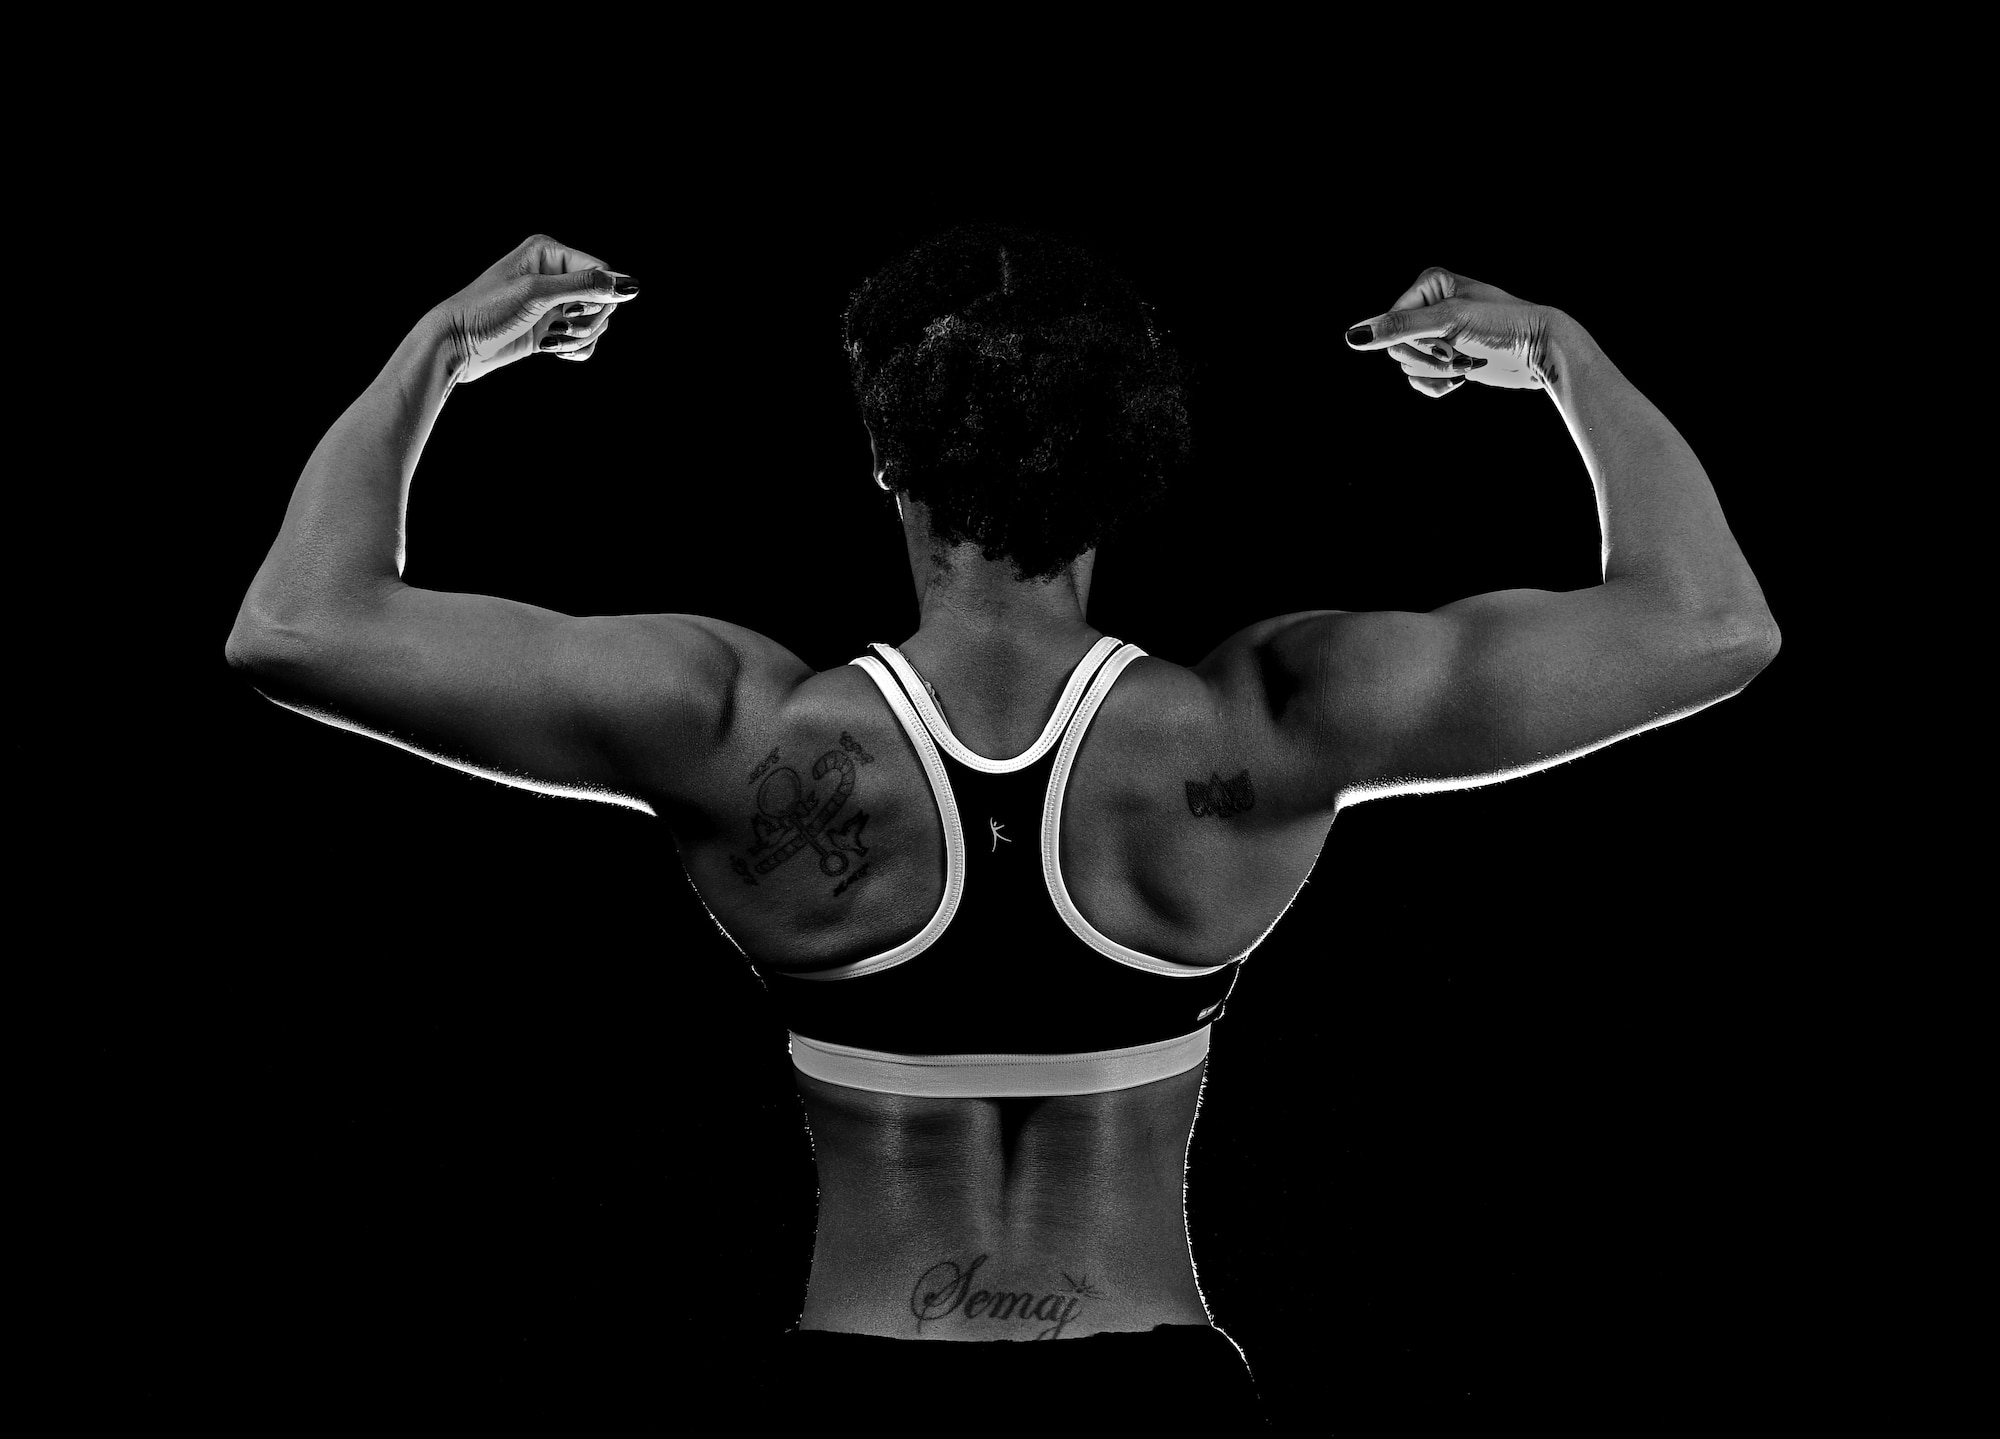 Staff Sgt. Semaj, 432nd Aircraft Maintenance Squadron supply craftsman, displays her back pose March 27, 2017, at Creech Air Force Base, Nev. Semaj is a nationally qualified amateur bodybuilder competing in the figure category. (U.S. Air Force photo/Senior Airman Christian Clausen)